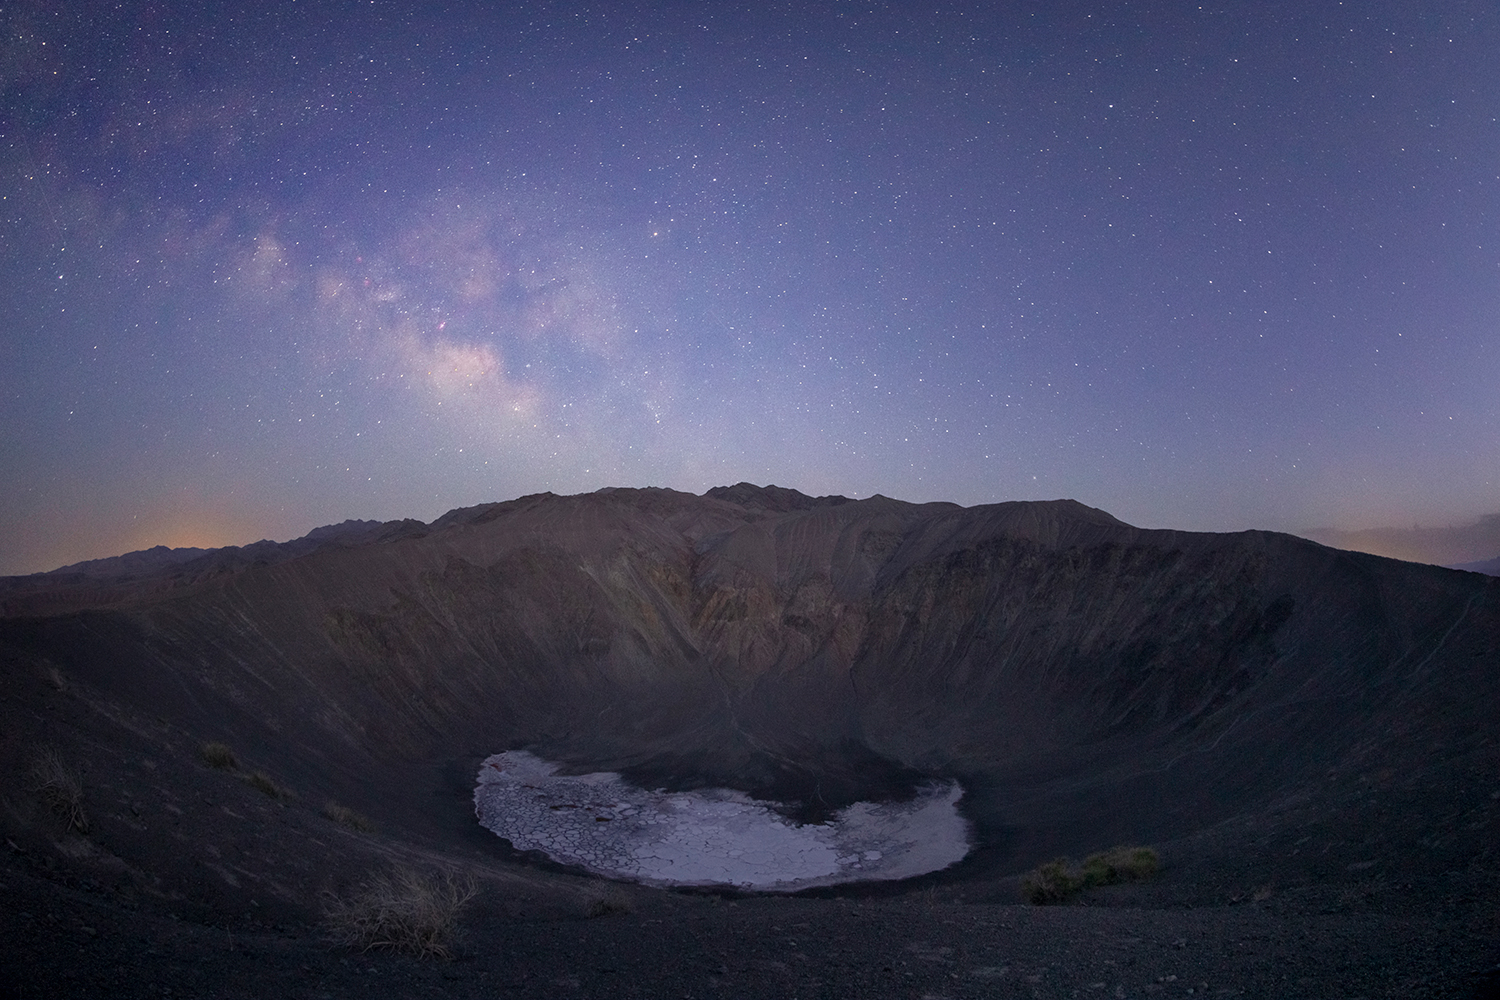 The Milky Way over the volcano